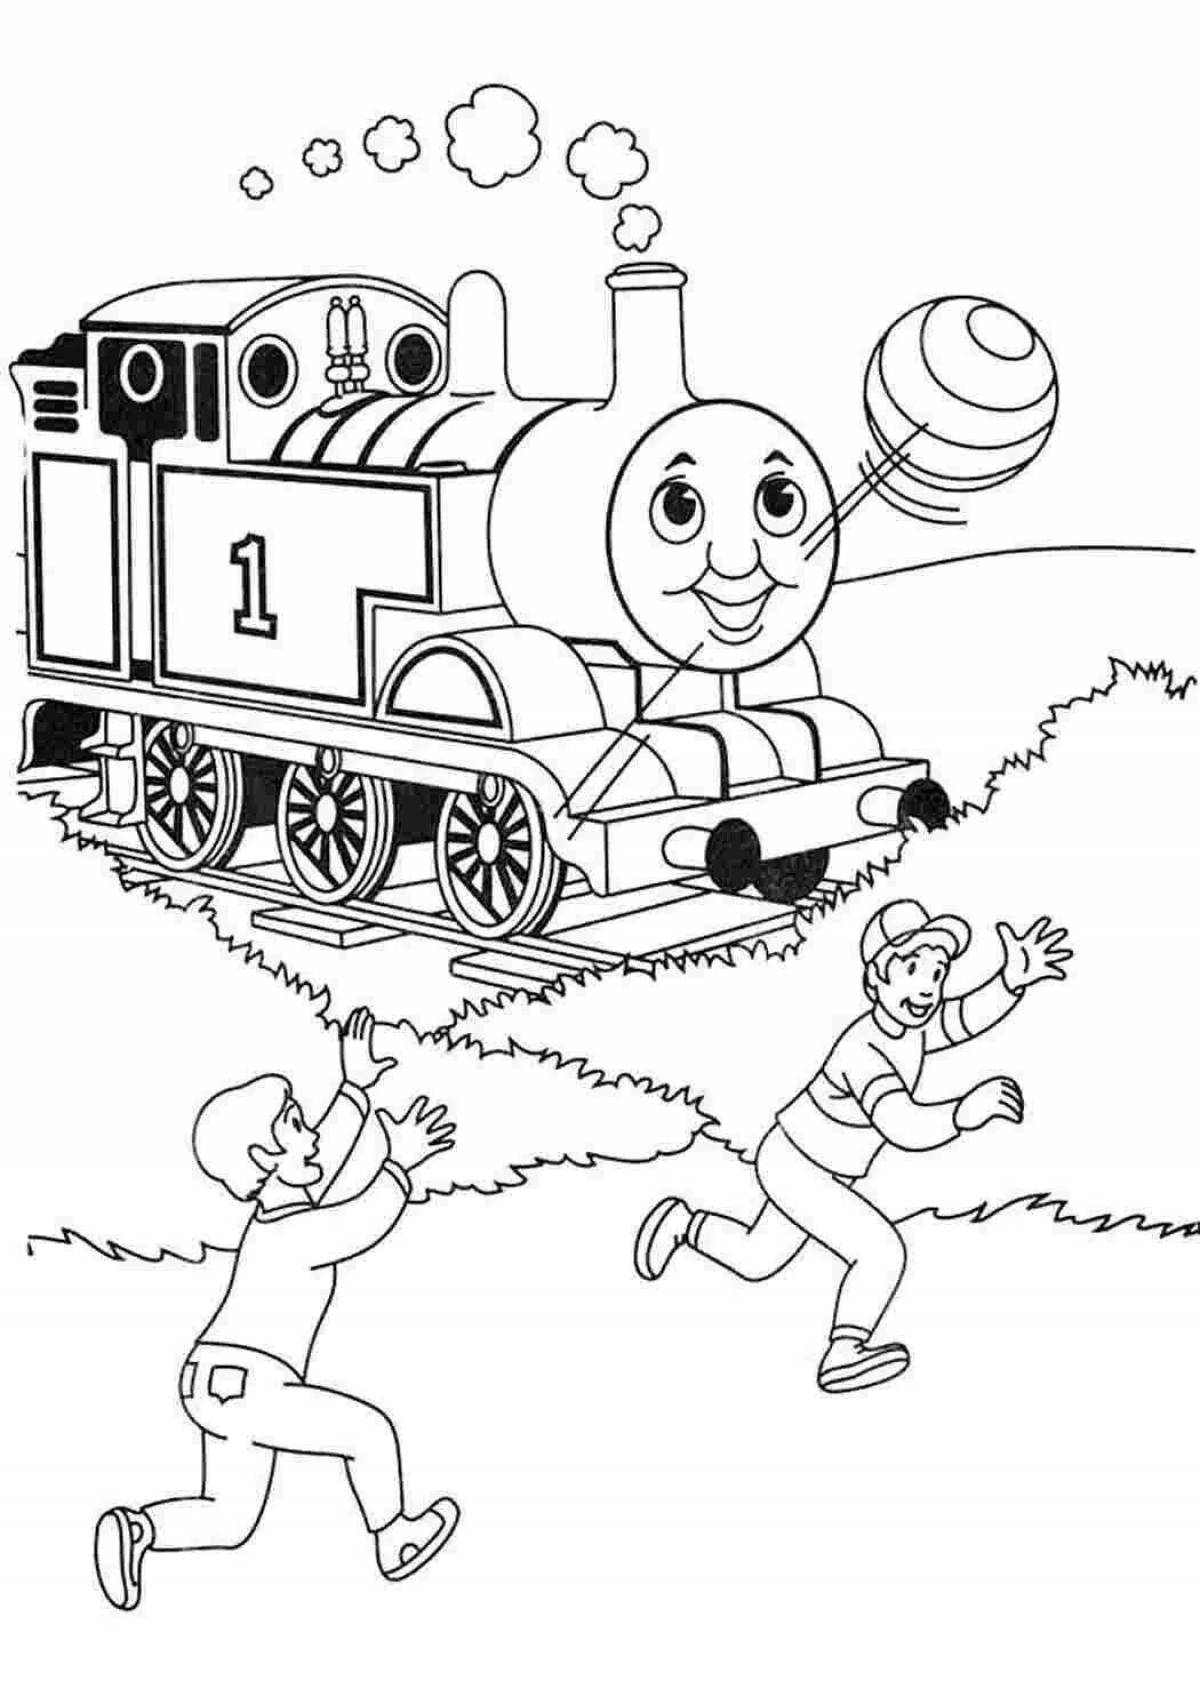 Coloring page joyful railway safety signs